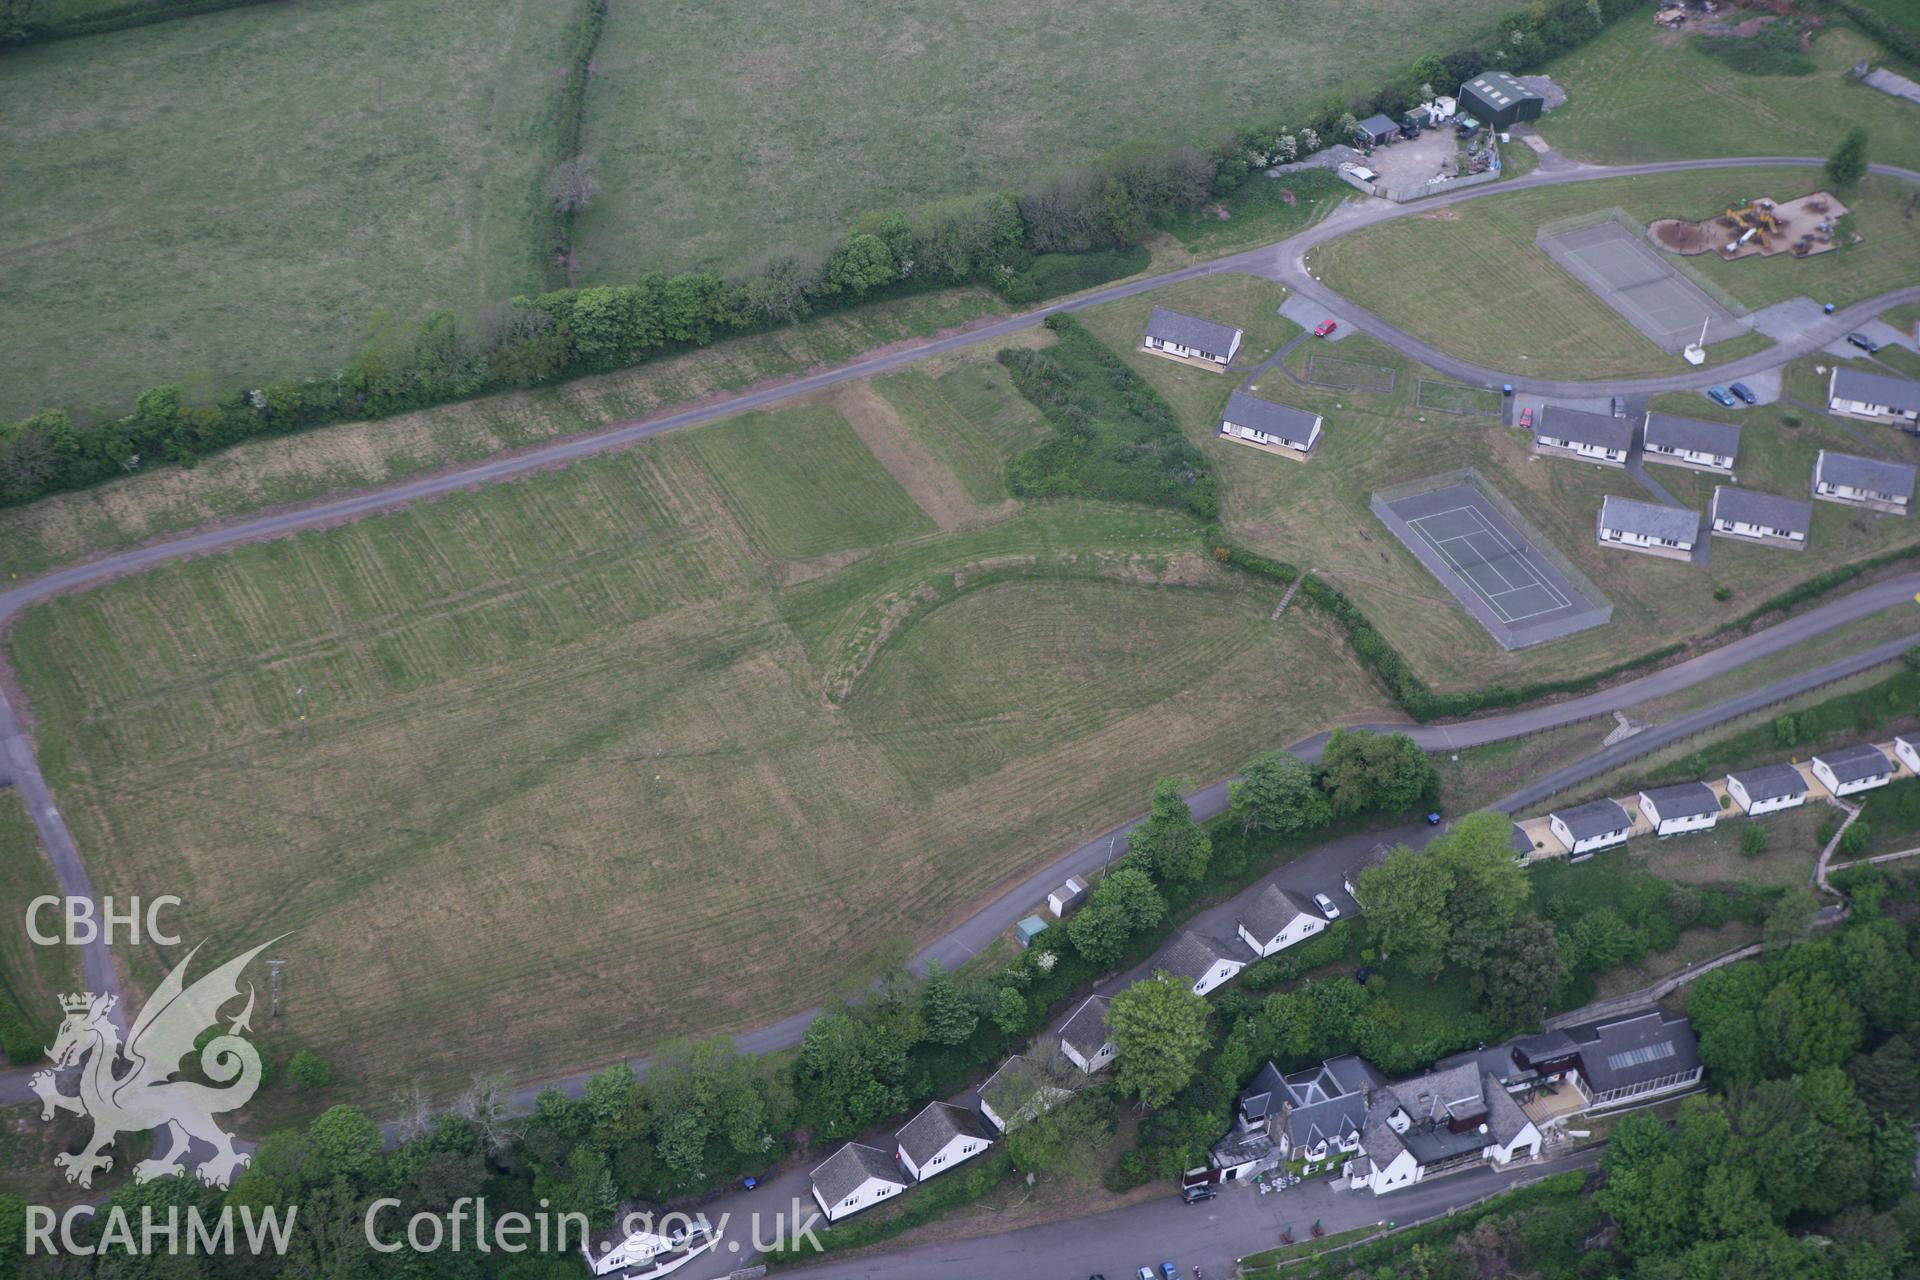 RCAHMW colour oblique photograph of Glan-y-Mor fort, Laugharne. Taken by Toby Driver and Oliver Davies on 04/05/2011.